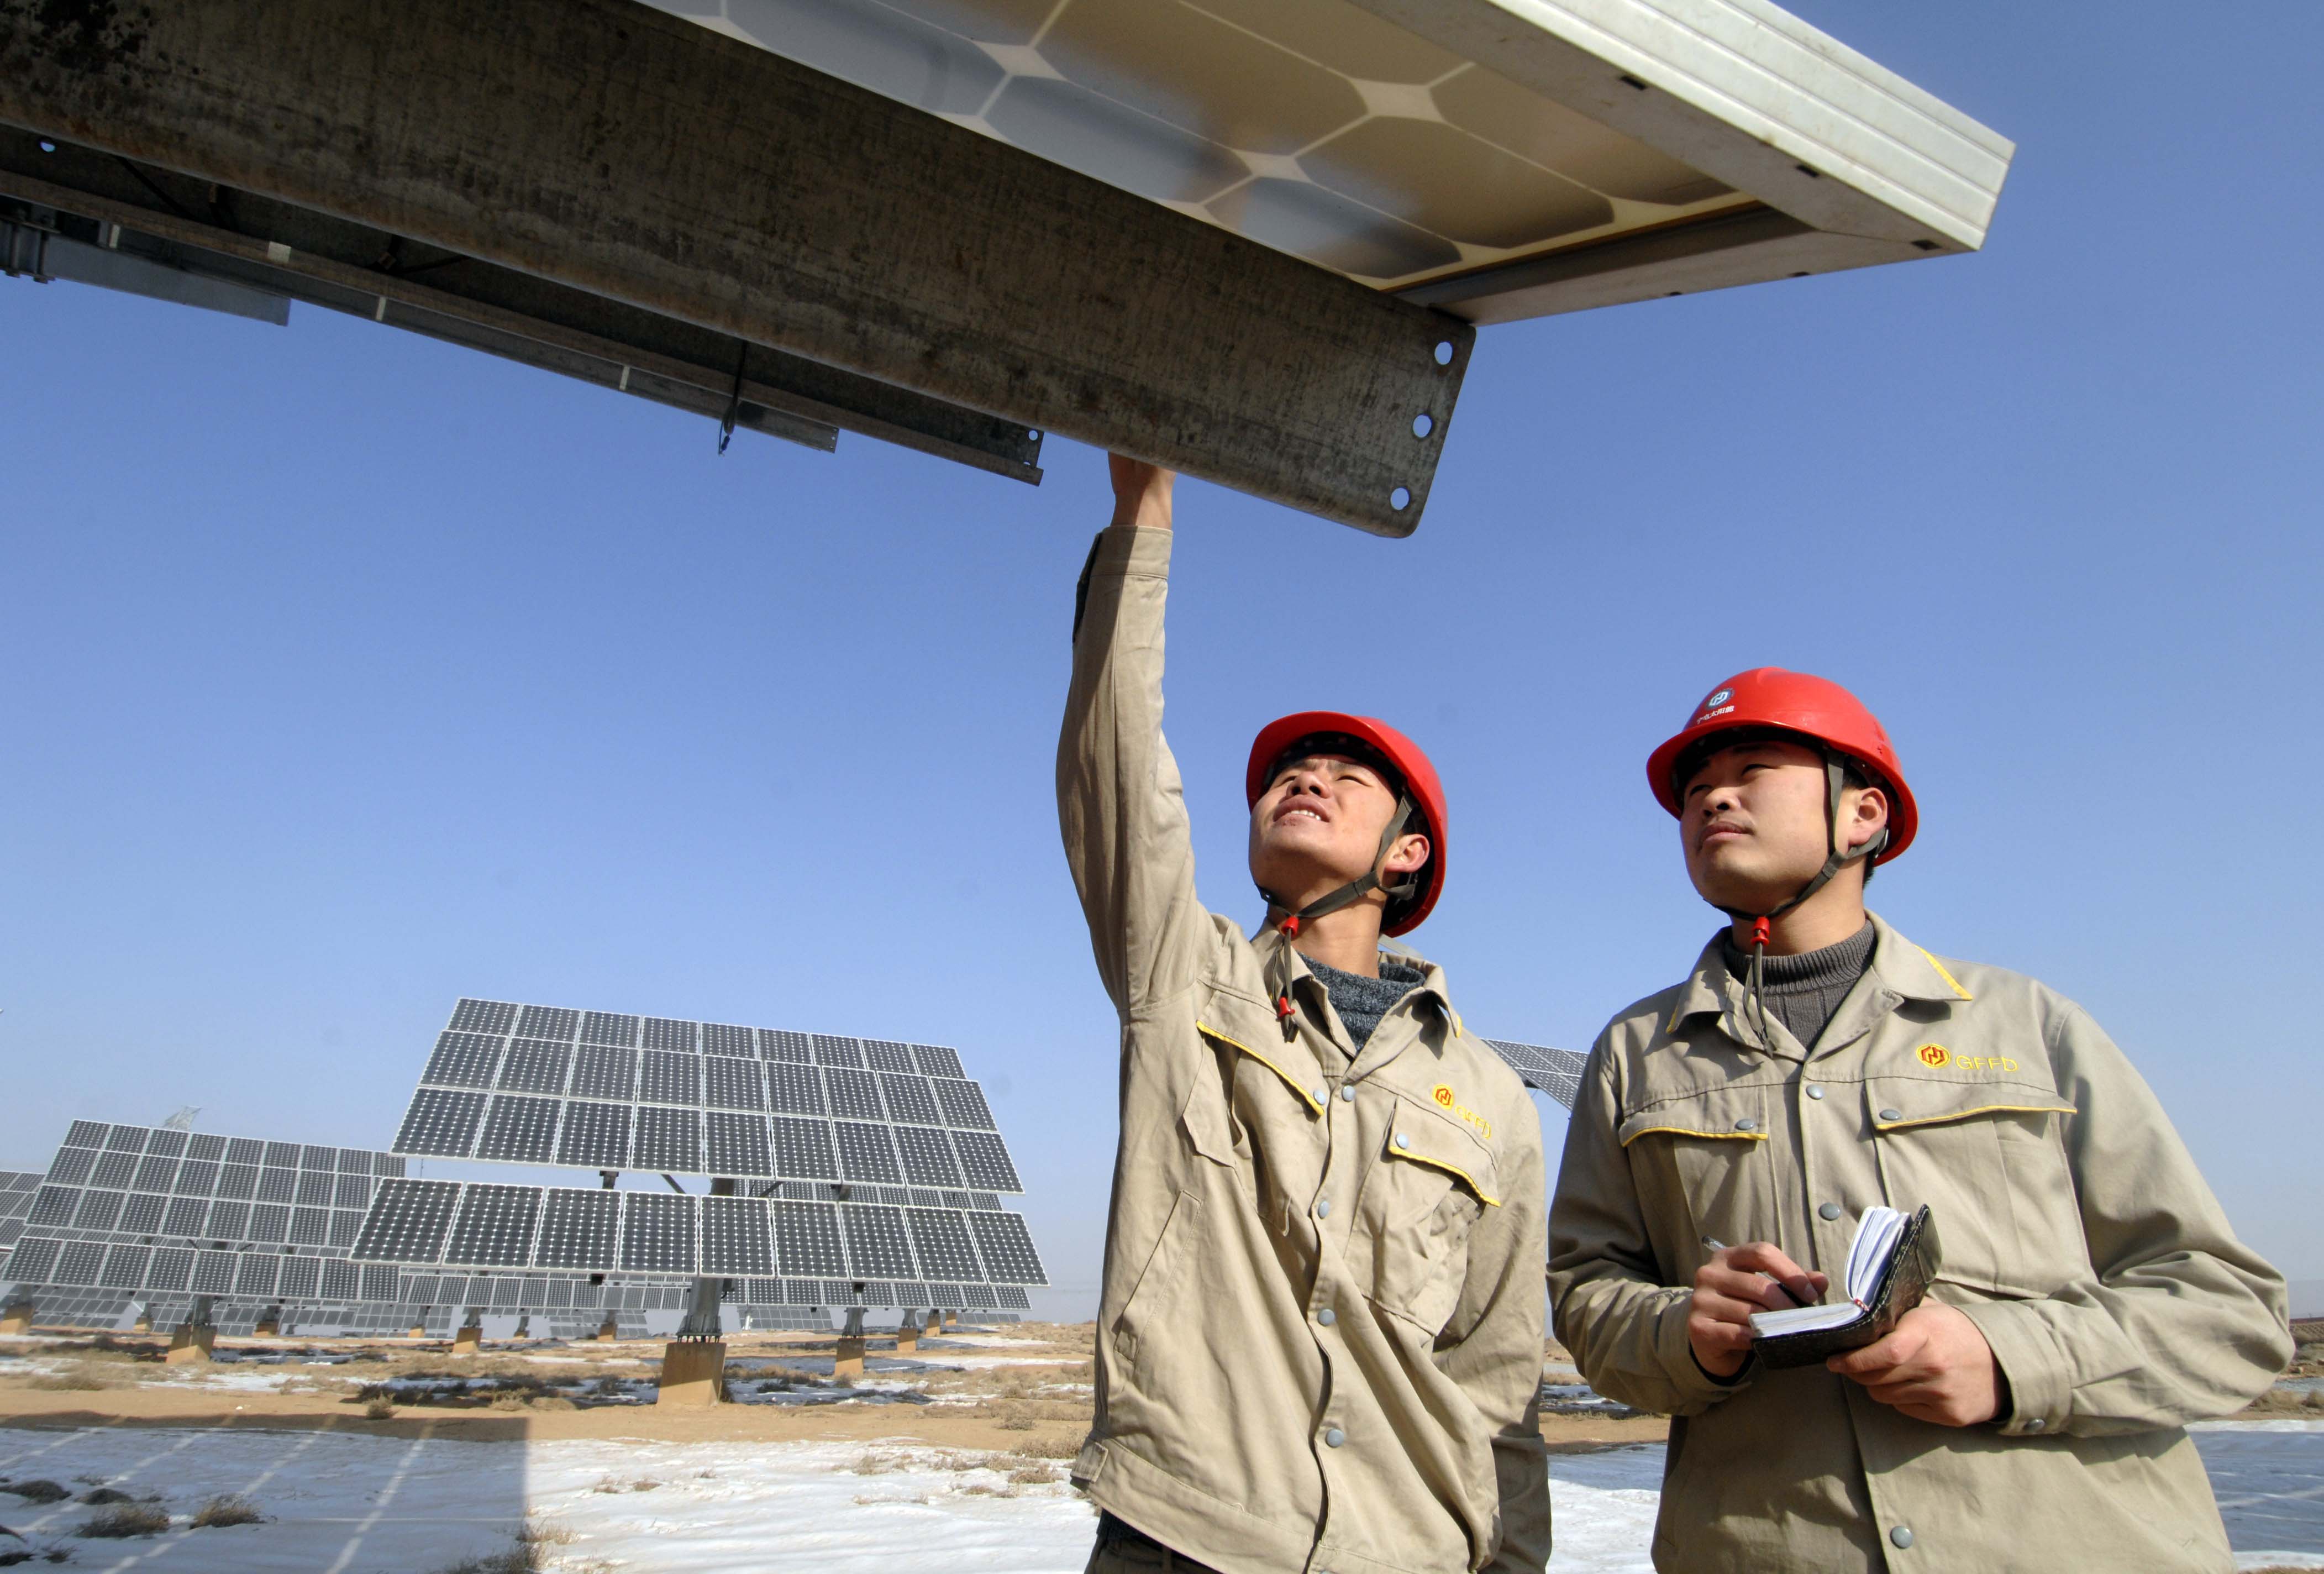 (111229) -- YINCHUAN, Dec. 29, 2011 (Xinhua) -- Working staff check the condition of solar panel in Hongsibao PV Power Station of Ningxia Electric Power Group, northwest China's Ningxia Hui Autonomous Region, Dec. 28, 2011. With the investment of 2.3 billion yuan (364 million U.S dollars), Ningxia Electric Power Group has established 6 grid-connected PV power stations with an installed capacity of 103.33 megawatts. The total generation capacity has reached 62.55 million kwh. (Xinhua/Peng Zhaozhi) (mp)